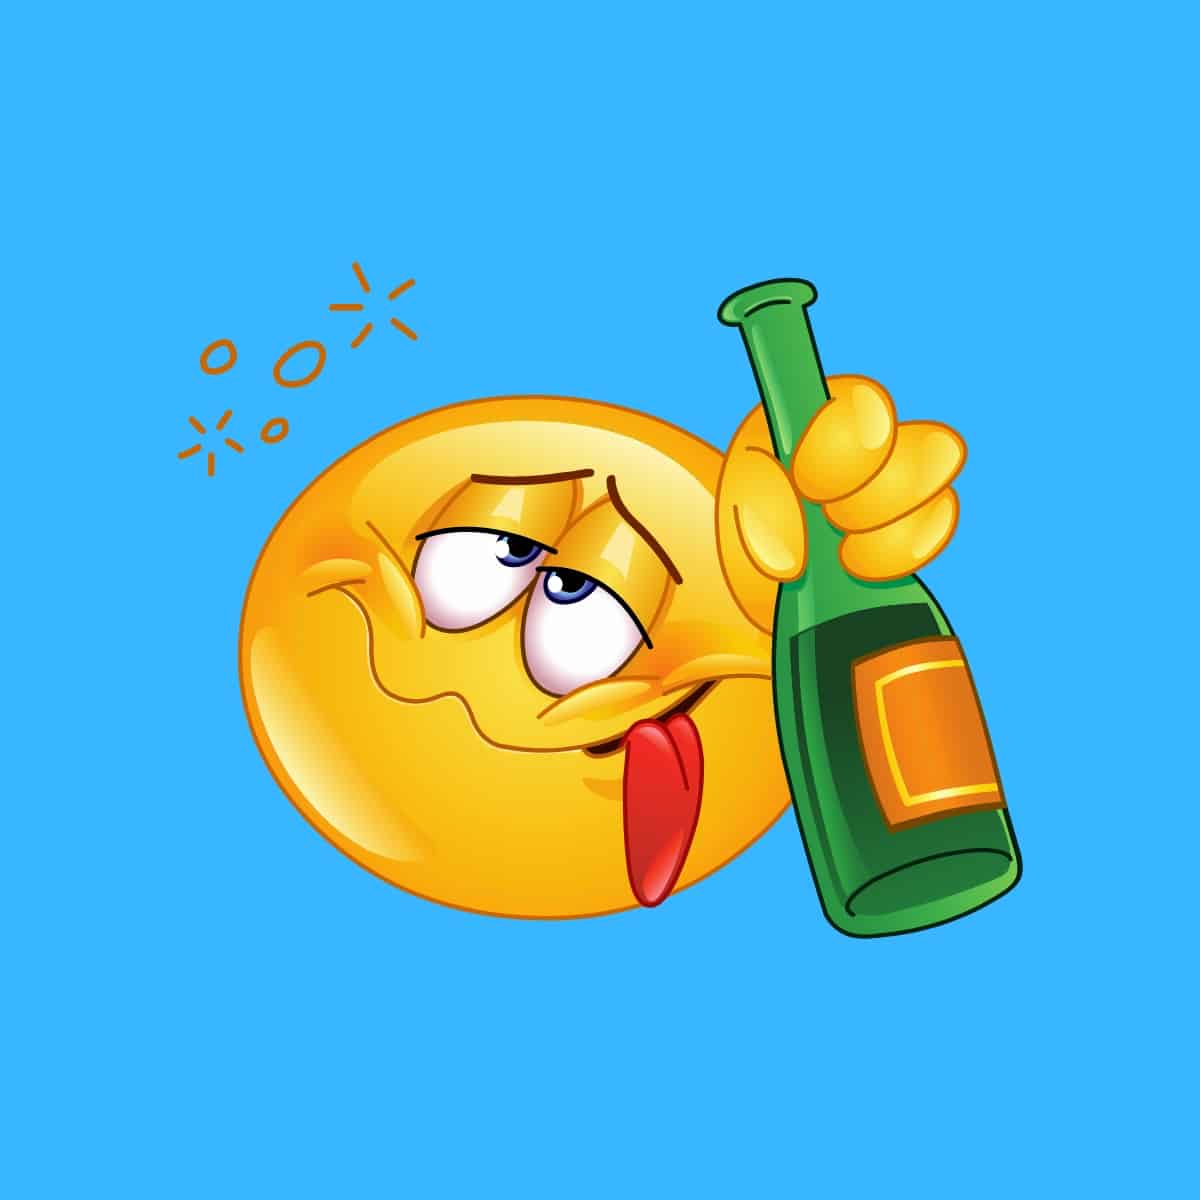 Cartoon graphic of a drunk emoji holding a bottle of alcohol on a blue background.